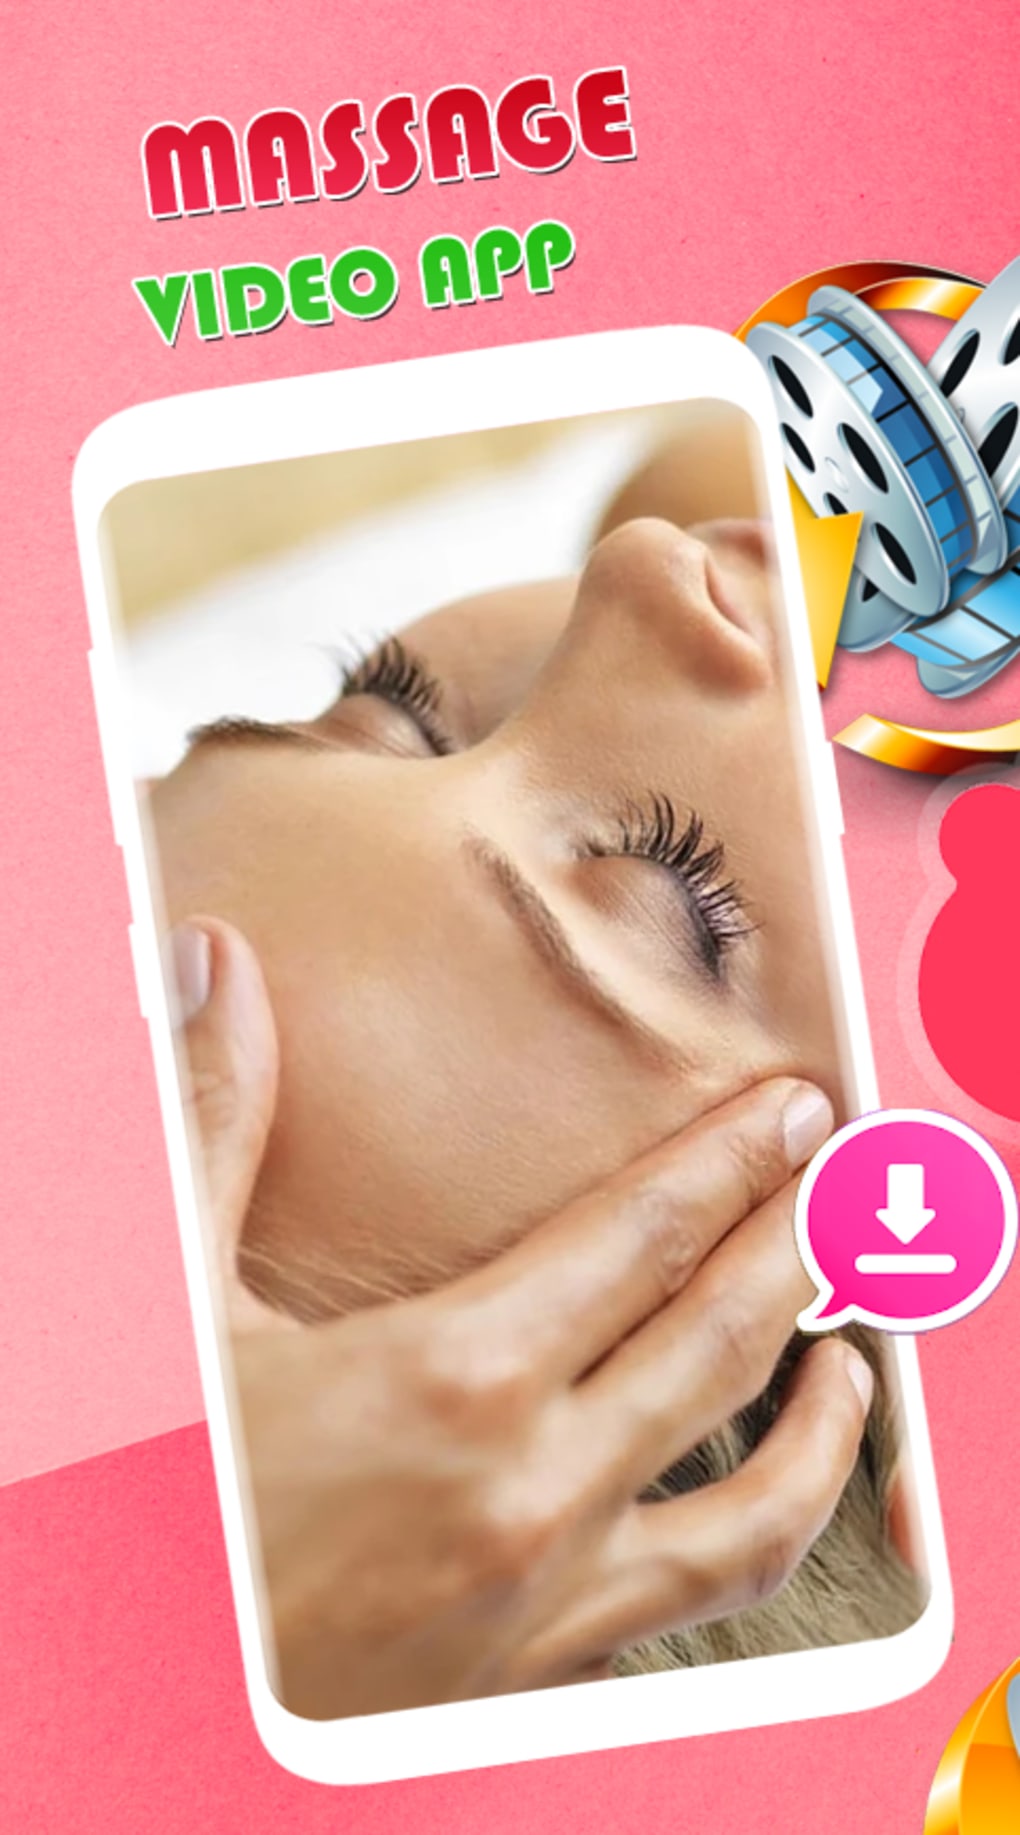 Hot Japanese Massage Videos App Para Android Download